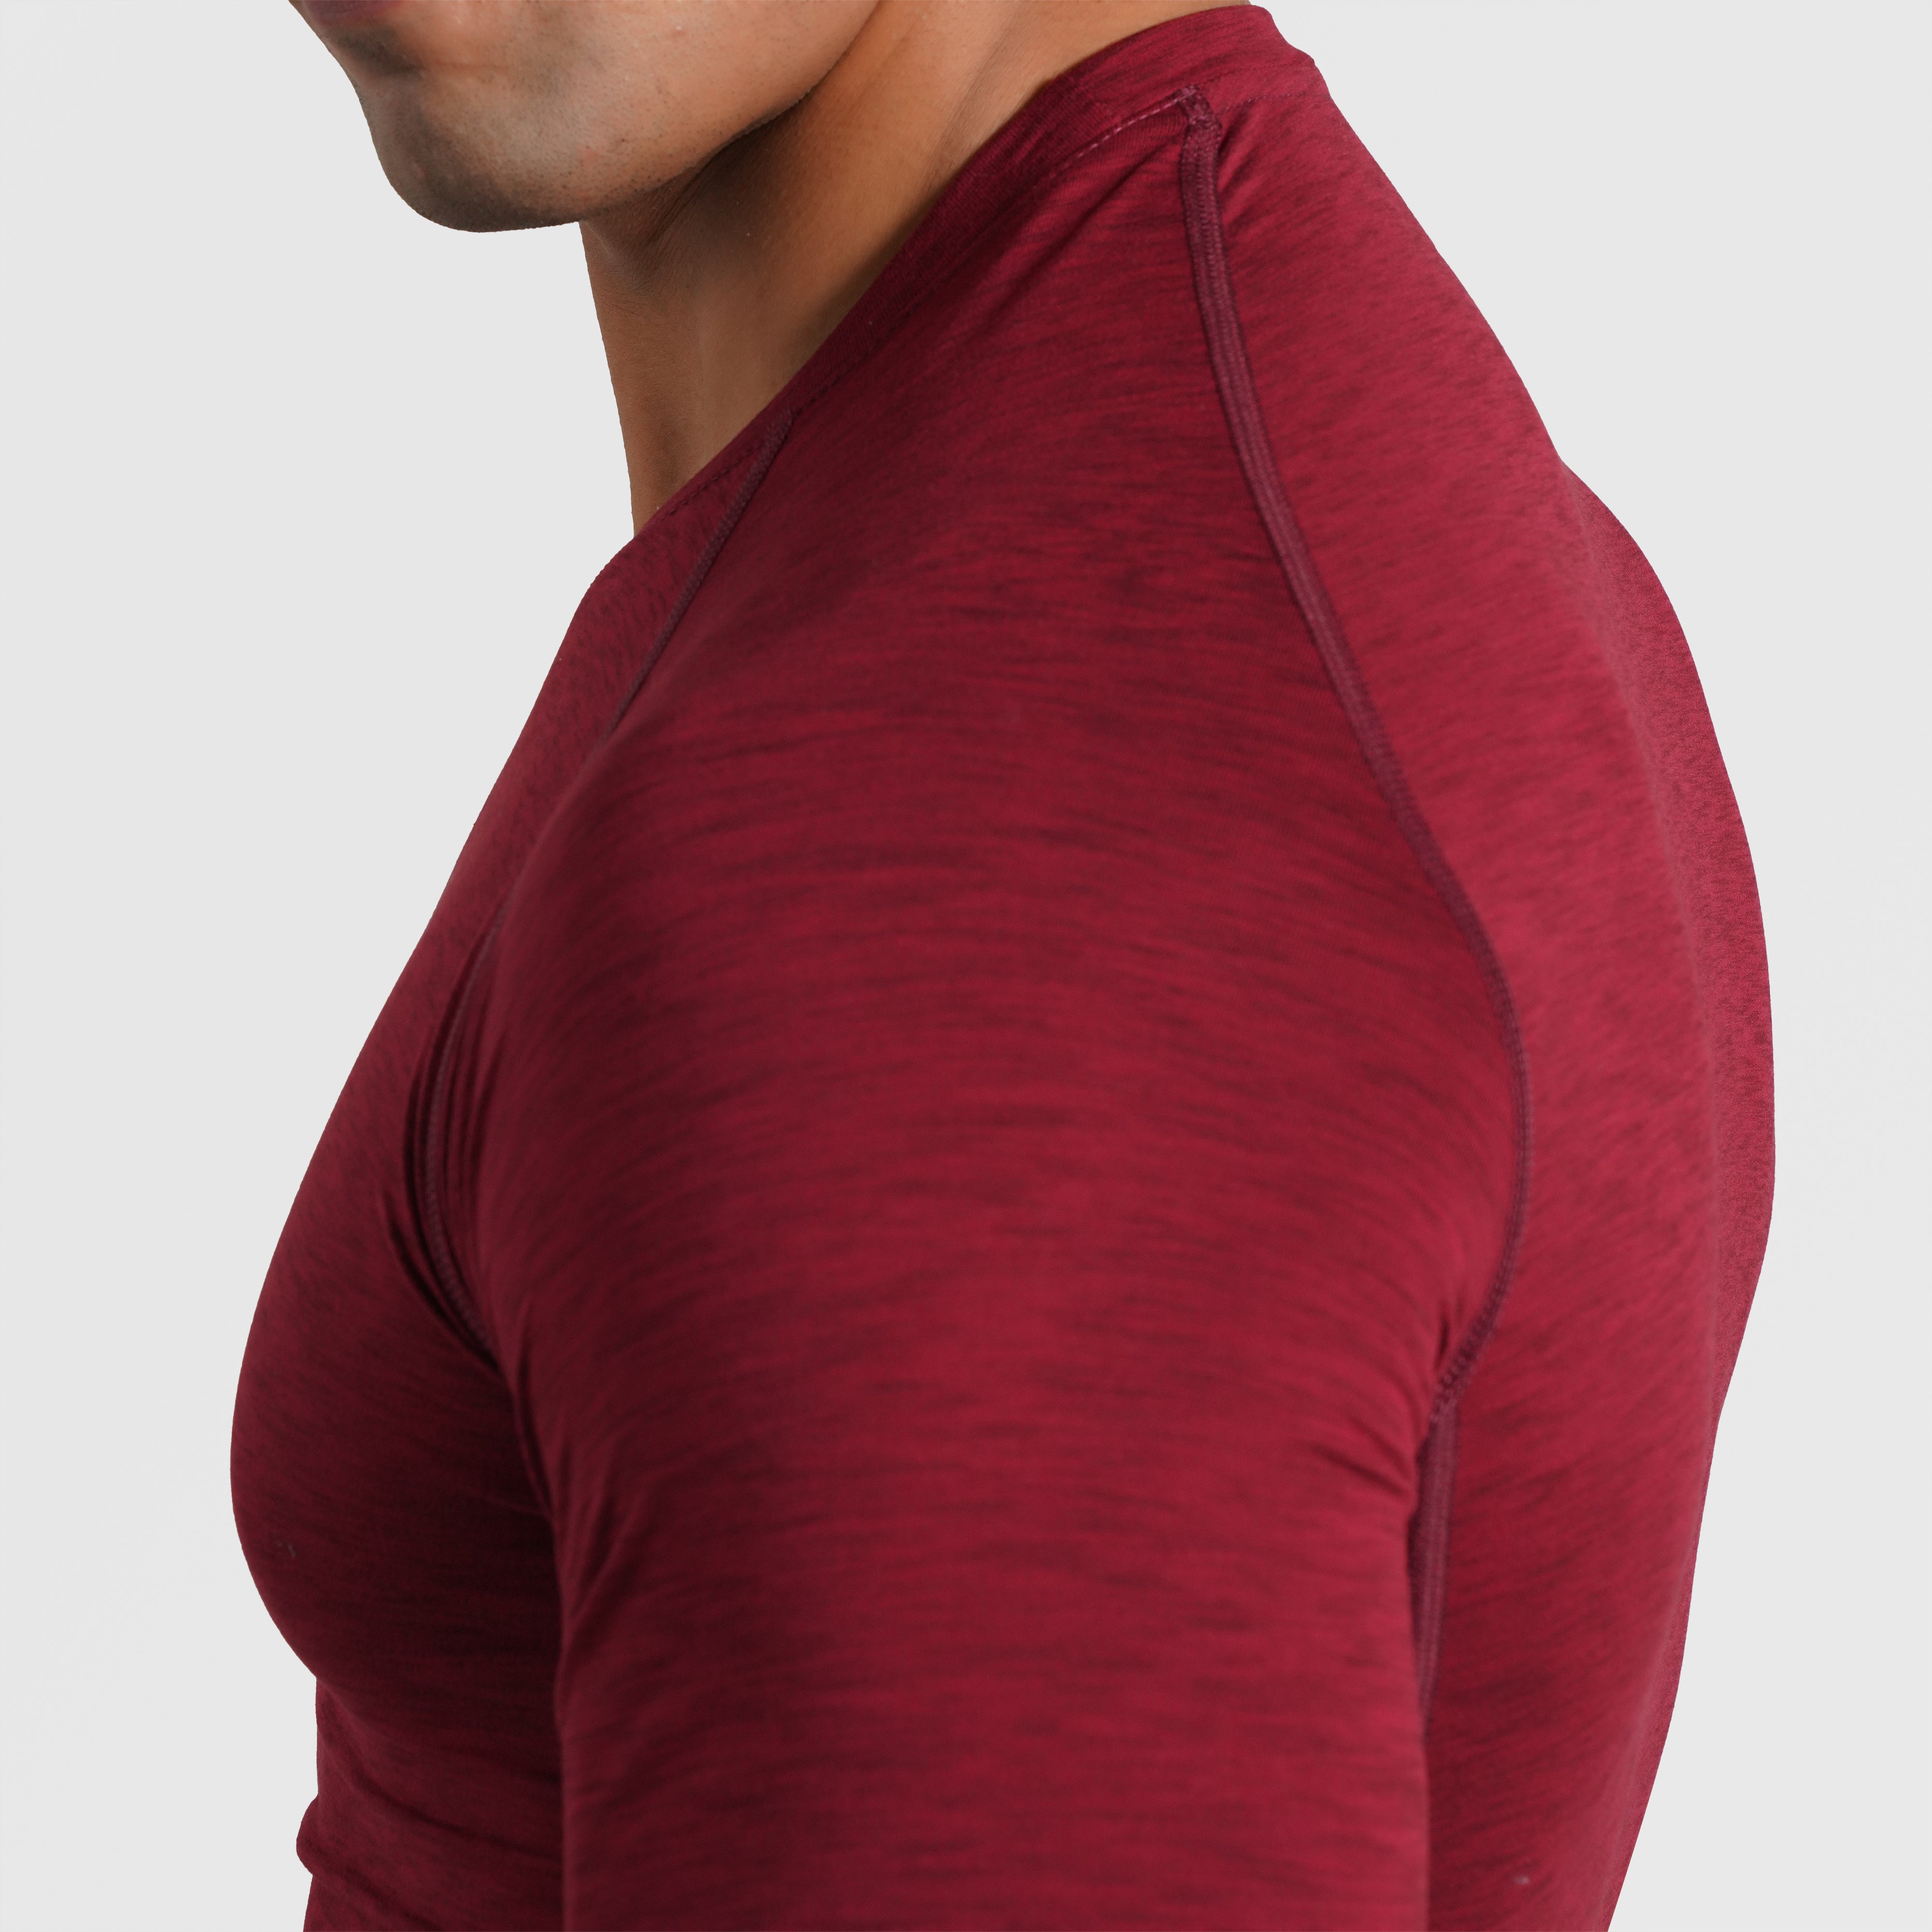 Armour Compression Shirt (MLNG-Maroon)